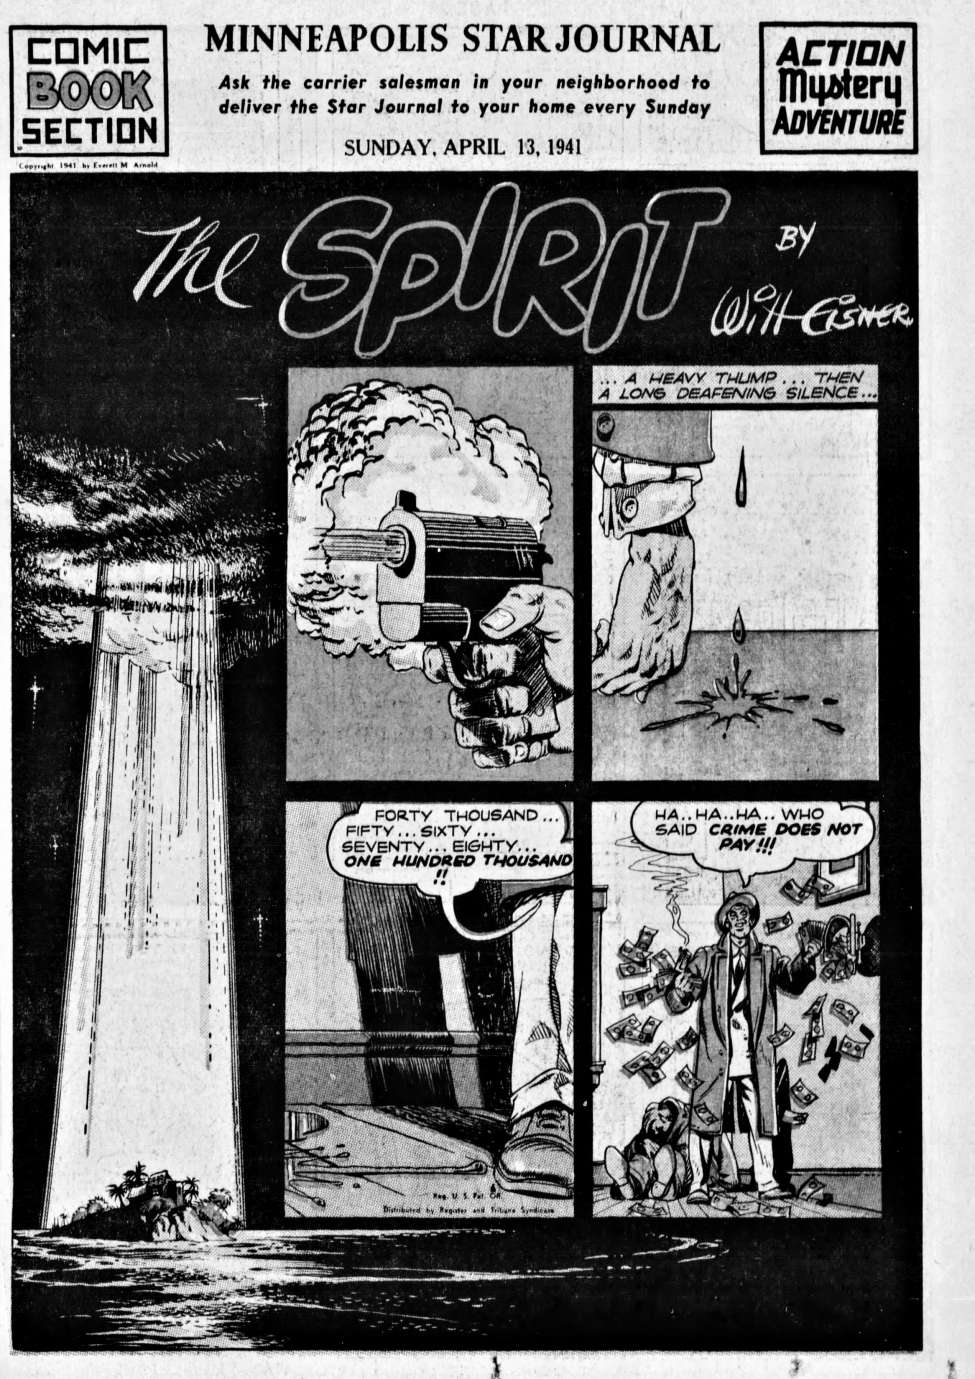 Book Cover For The Spirit (1941-04-13) - Minneapolis Star Journal (b/w)